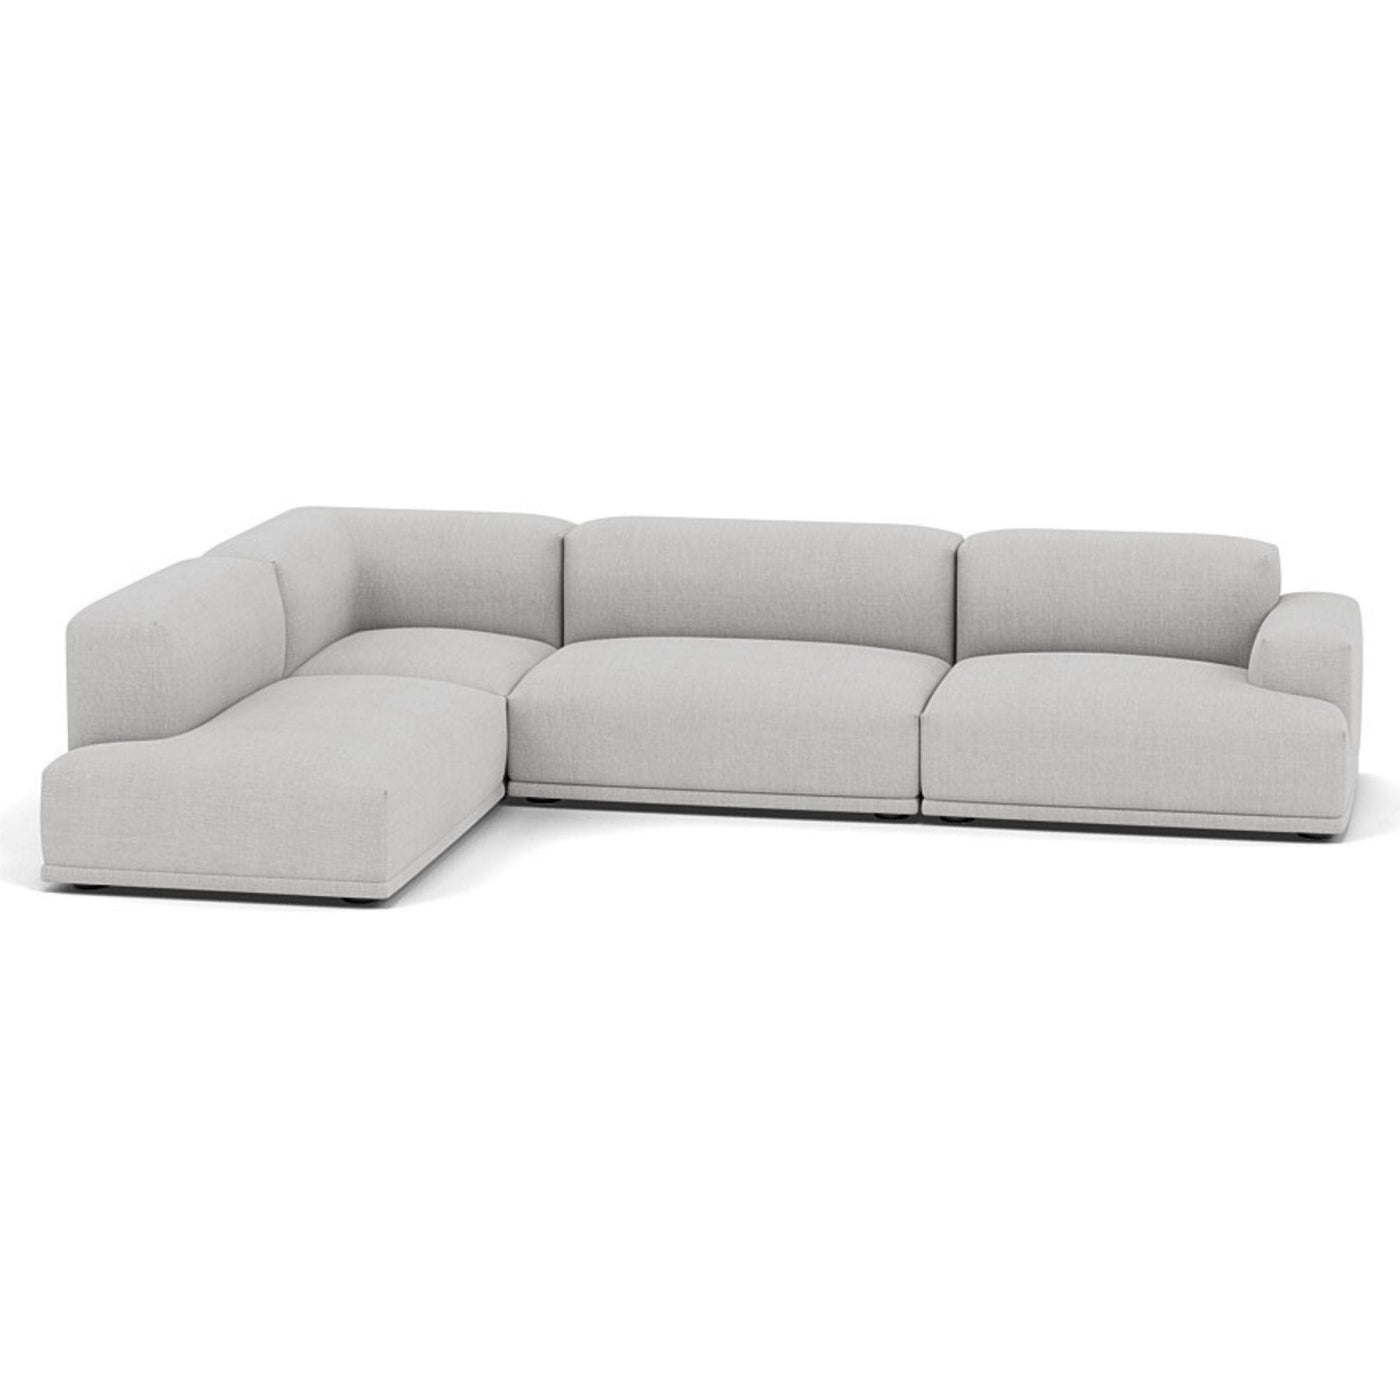 Muuto Connect Modular Sofa Corner configuration. Made to order from someday designs. #colour_remix-123